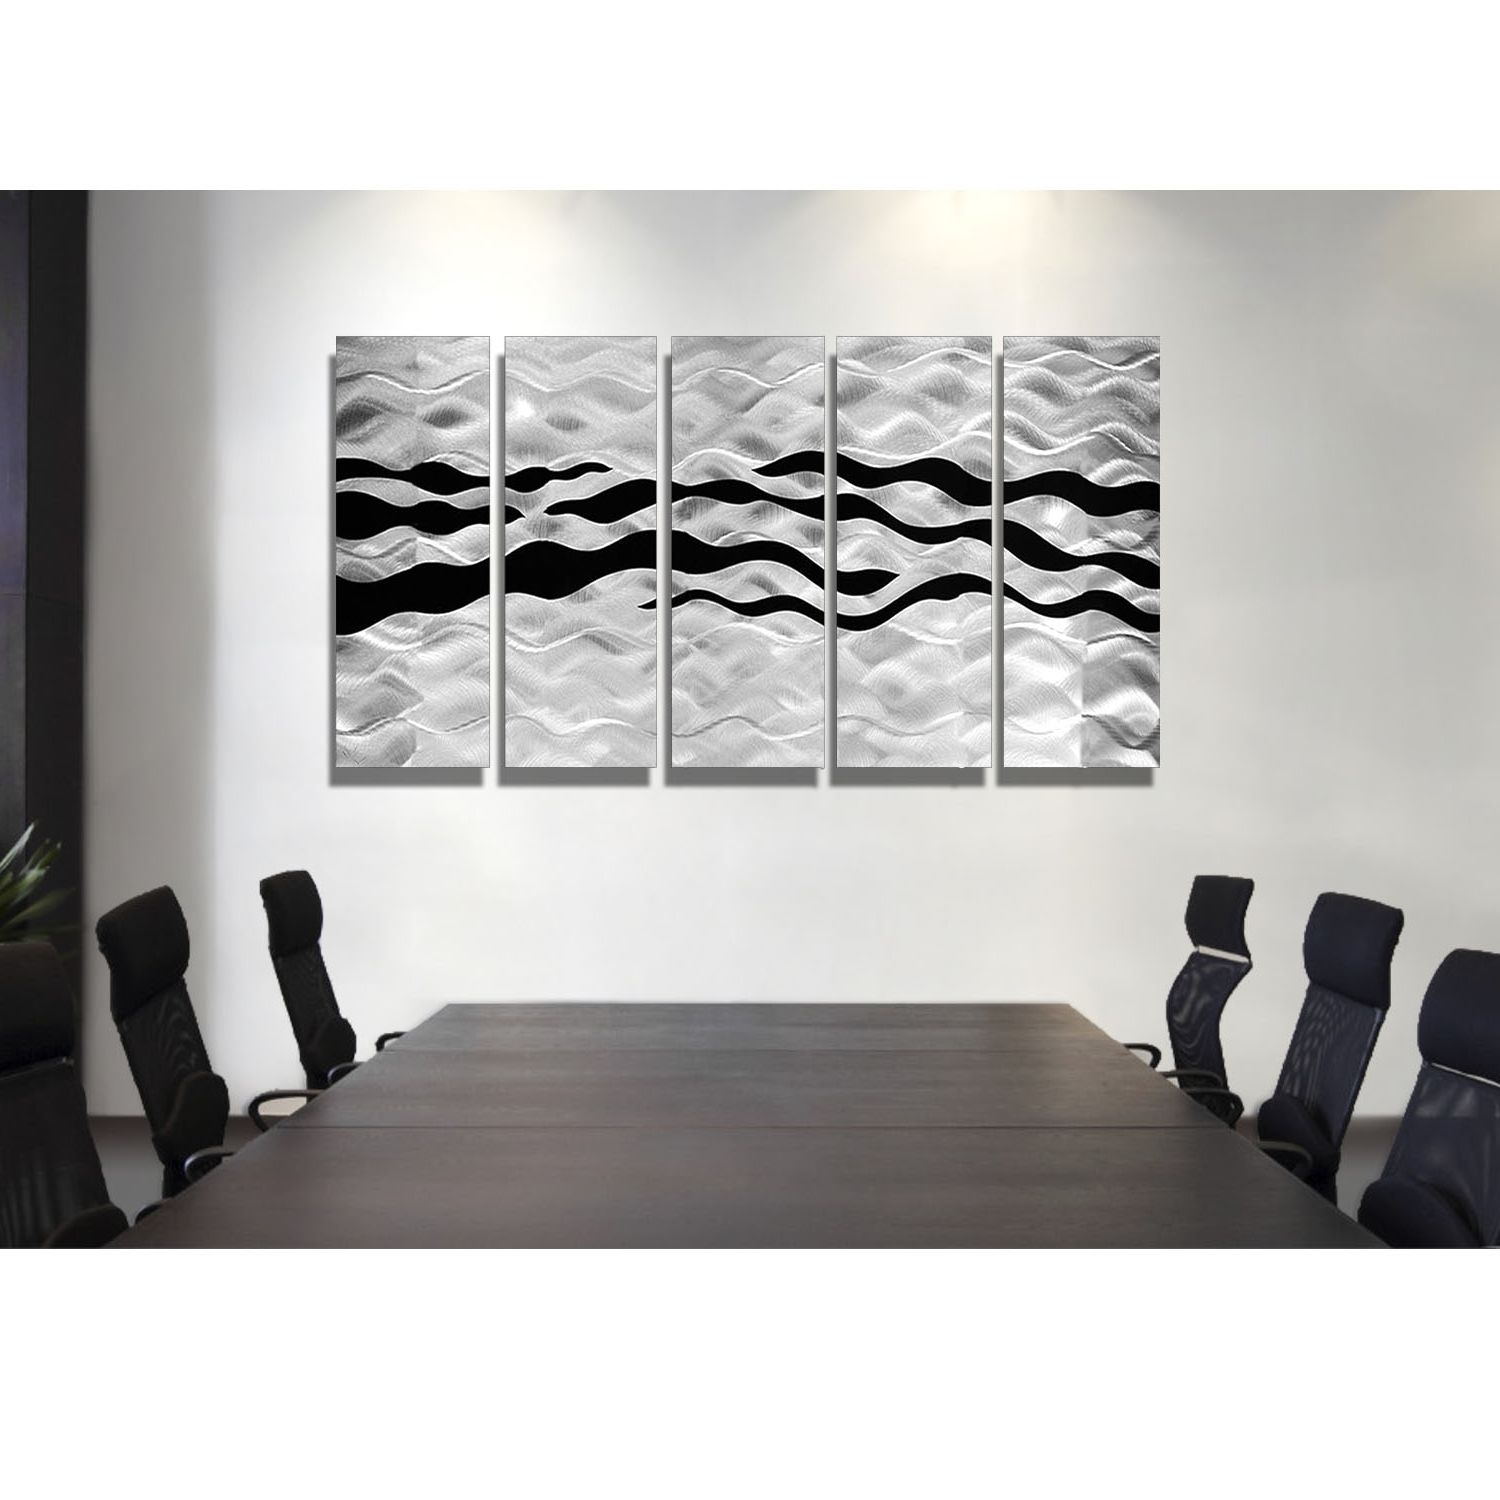 Onyx Oceana – Silver And Black Metal Wall Art – 5 Panel Wall Décor Intended For Widely Used Black Wall Art (View 1 of 20)